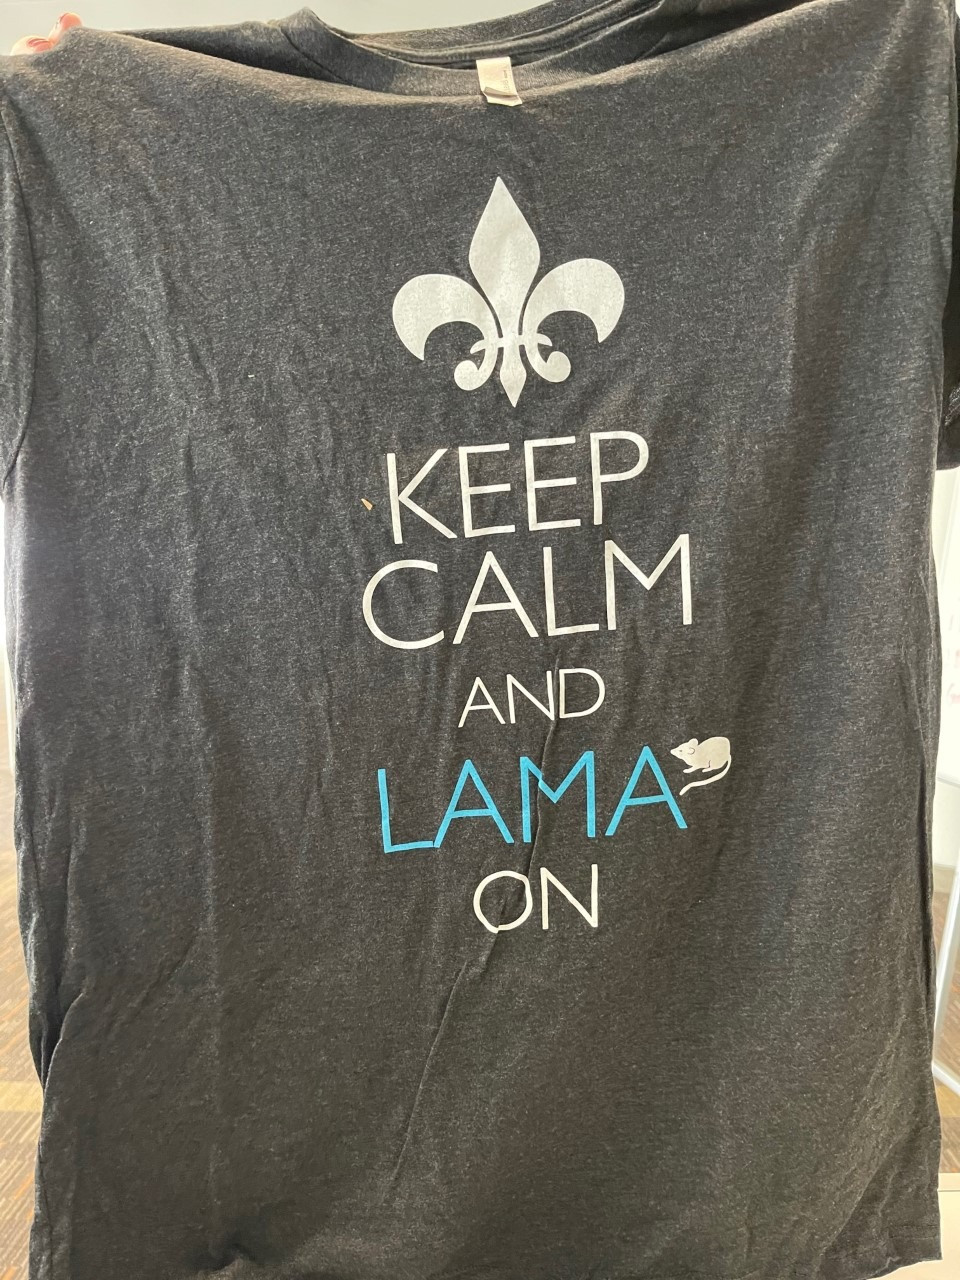 Keep Calm and Lama On  T-Shirt #1 - Size XL